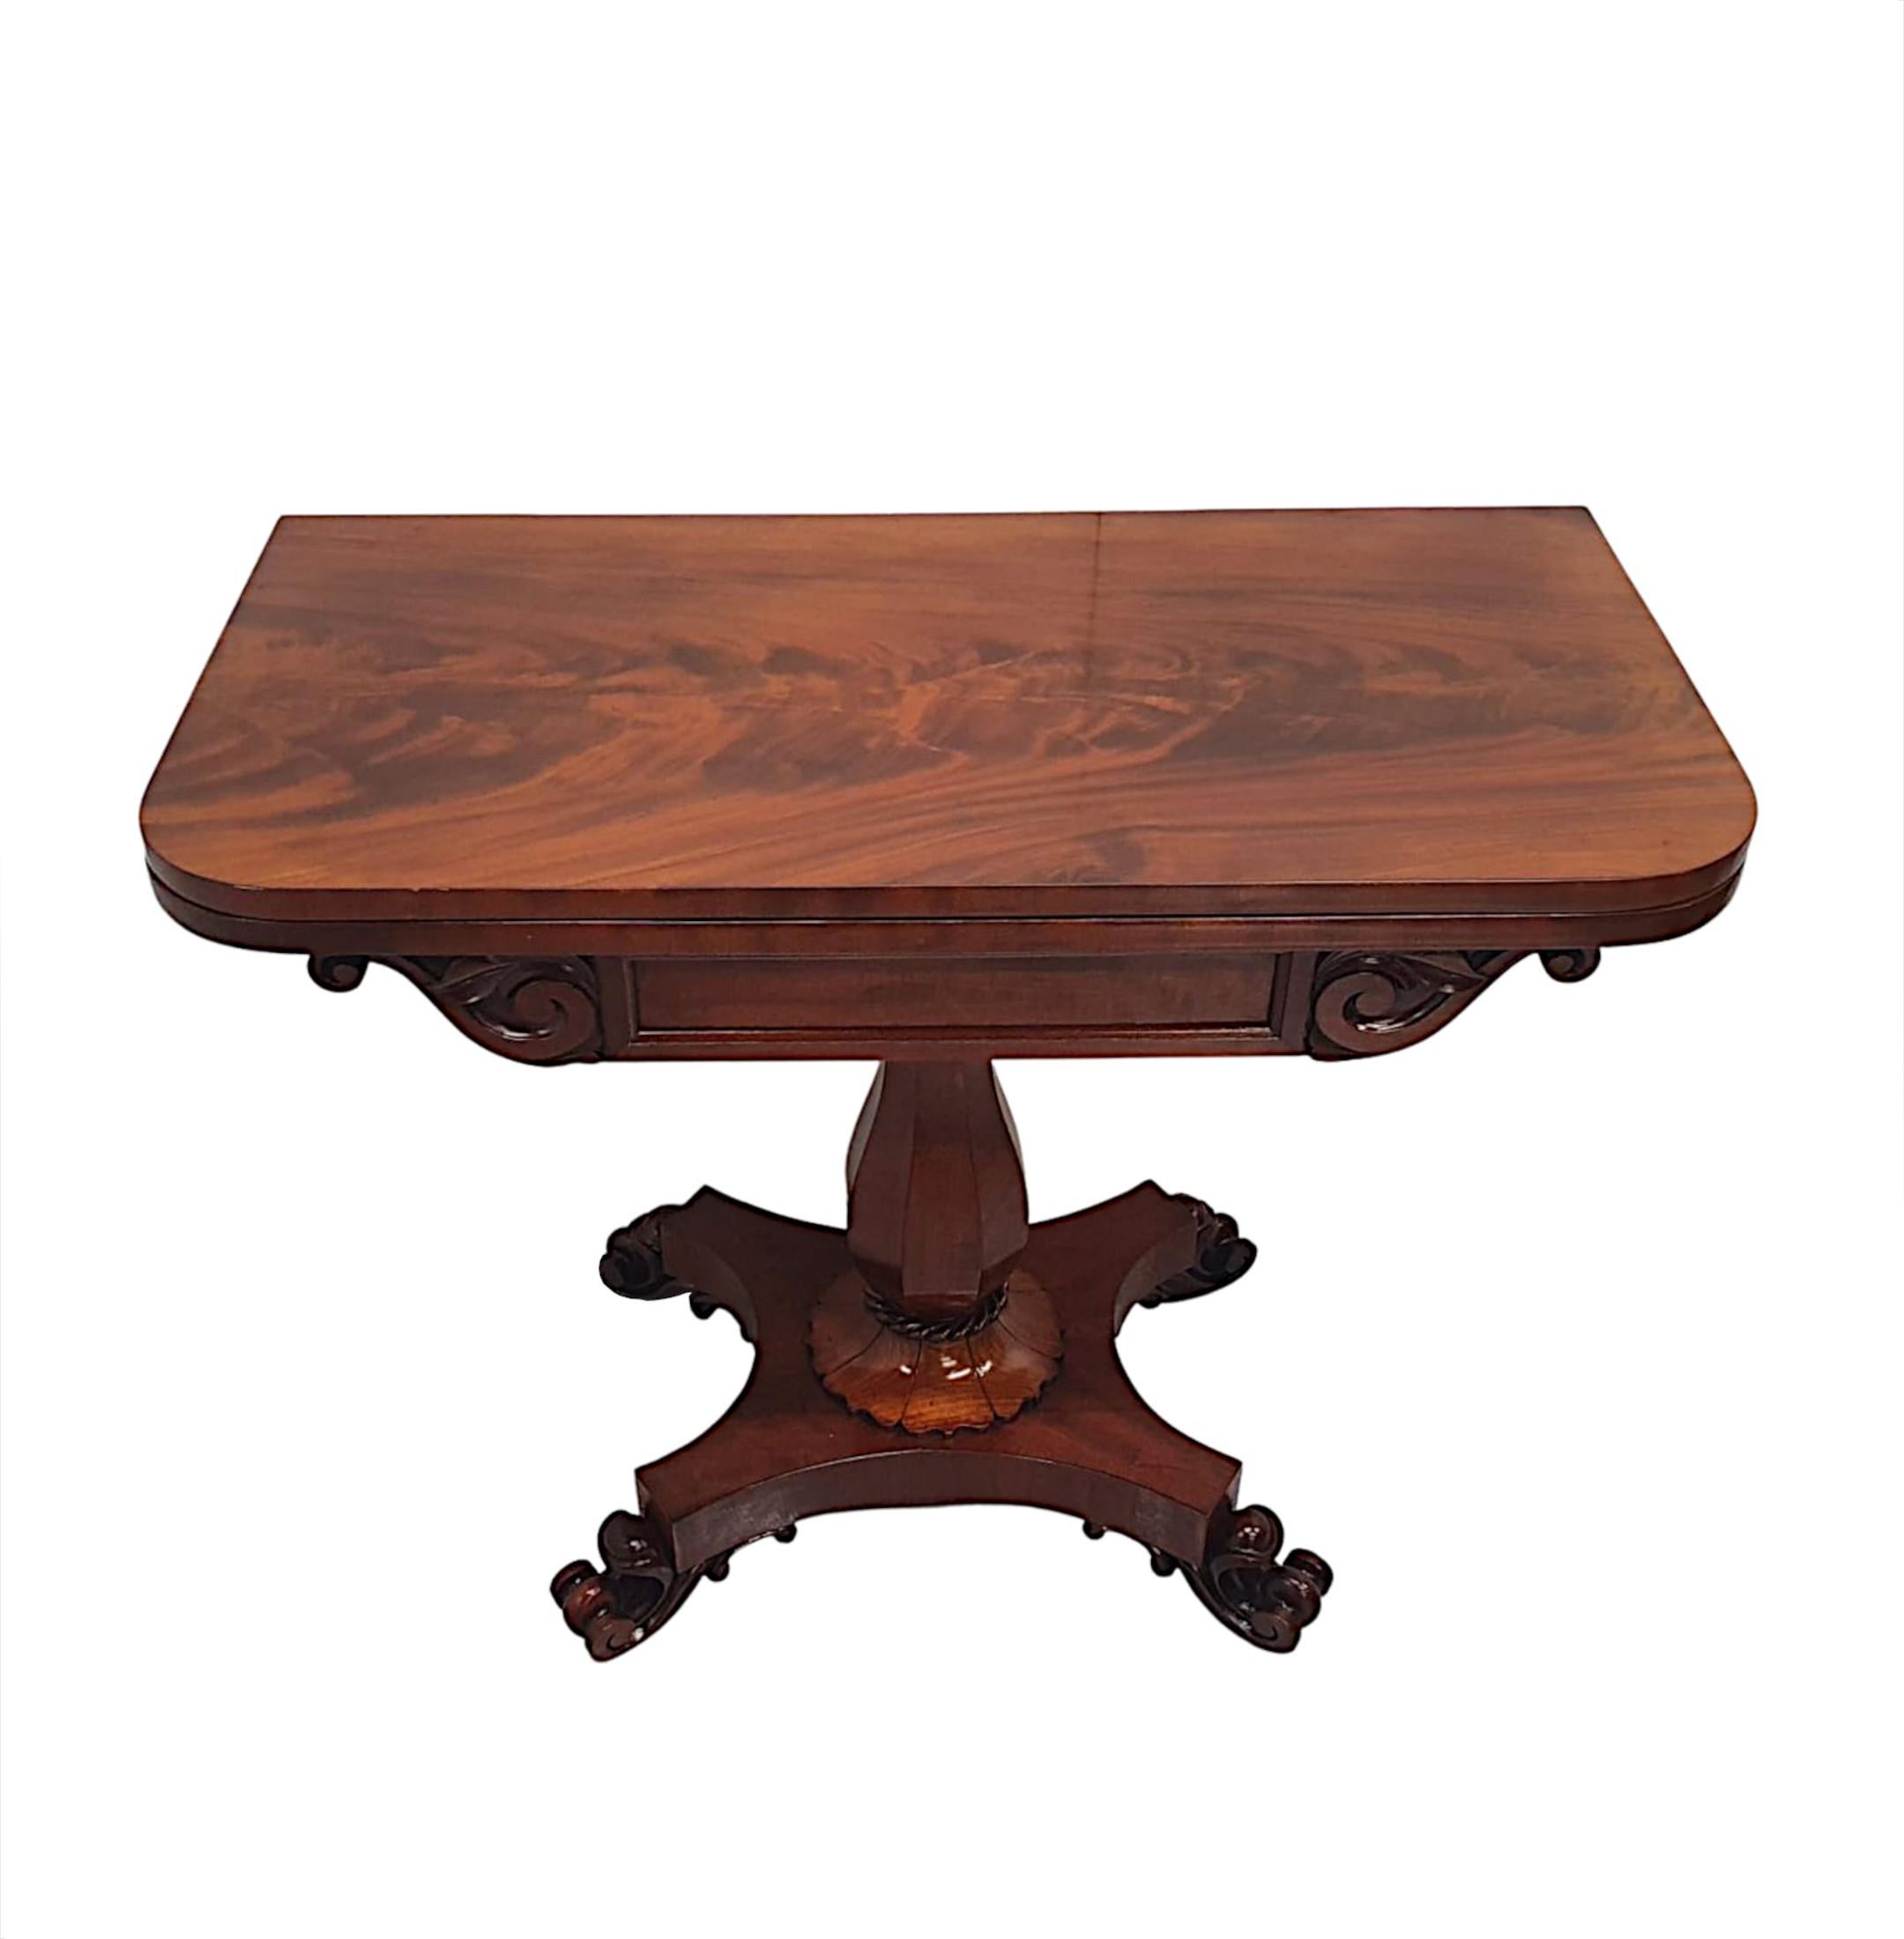 A very rare pair of 19th century William IV mahogany card tables attributed to Dublin maker Williams & Gibton. This fabulous pair of turn over leaf card tables are of gorgeous quality, finely hand carved with rich patination and grain. The finely